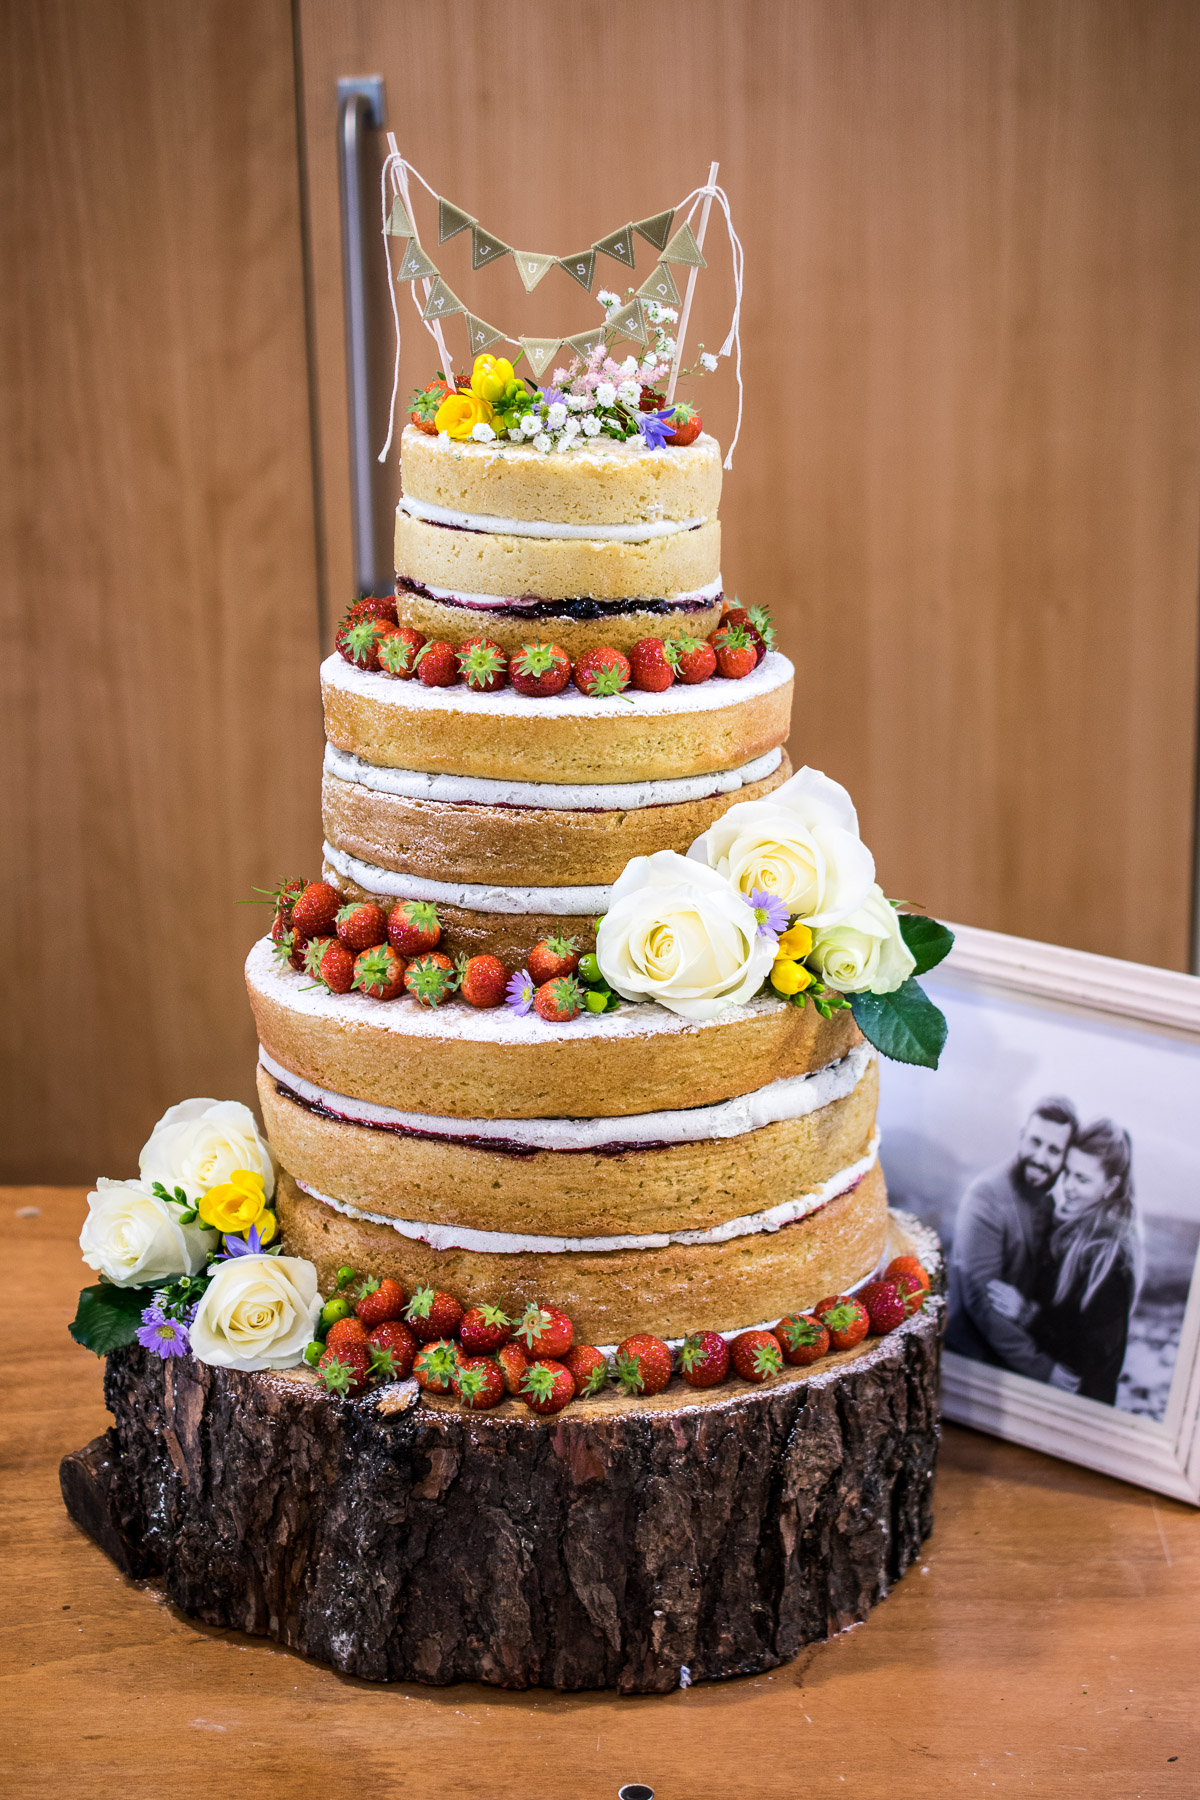 11 of the Best Naked Wedding Cakes| CHWV